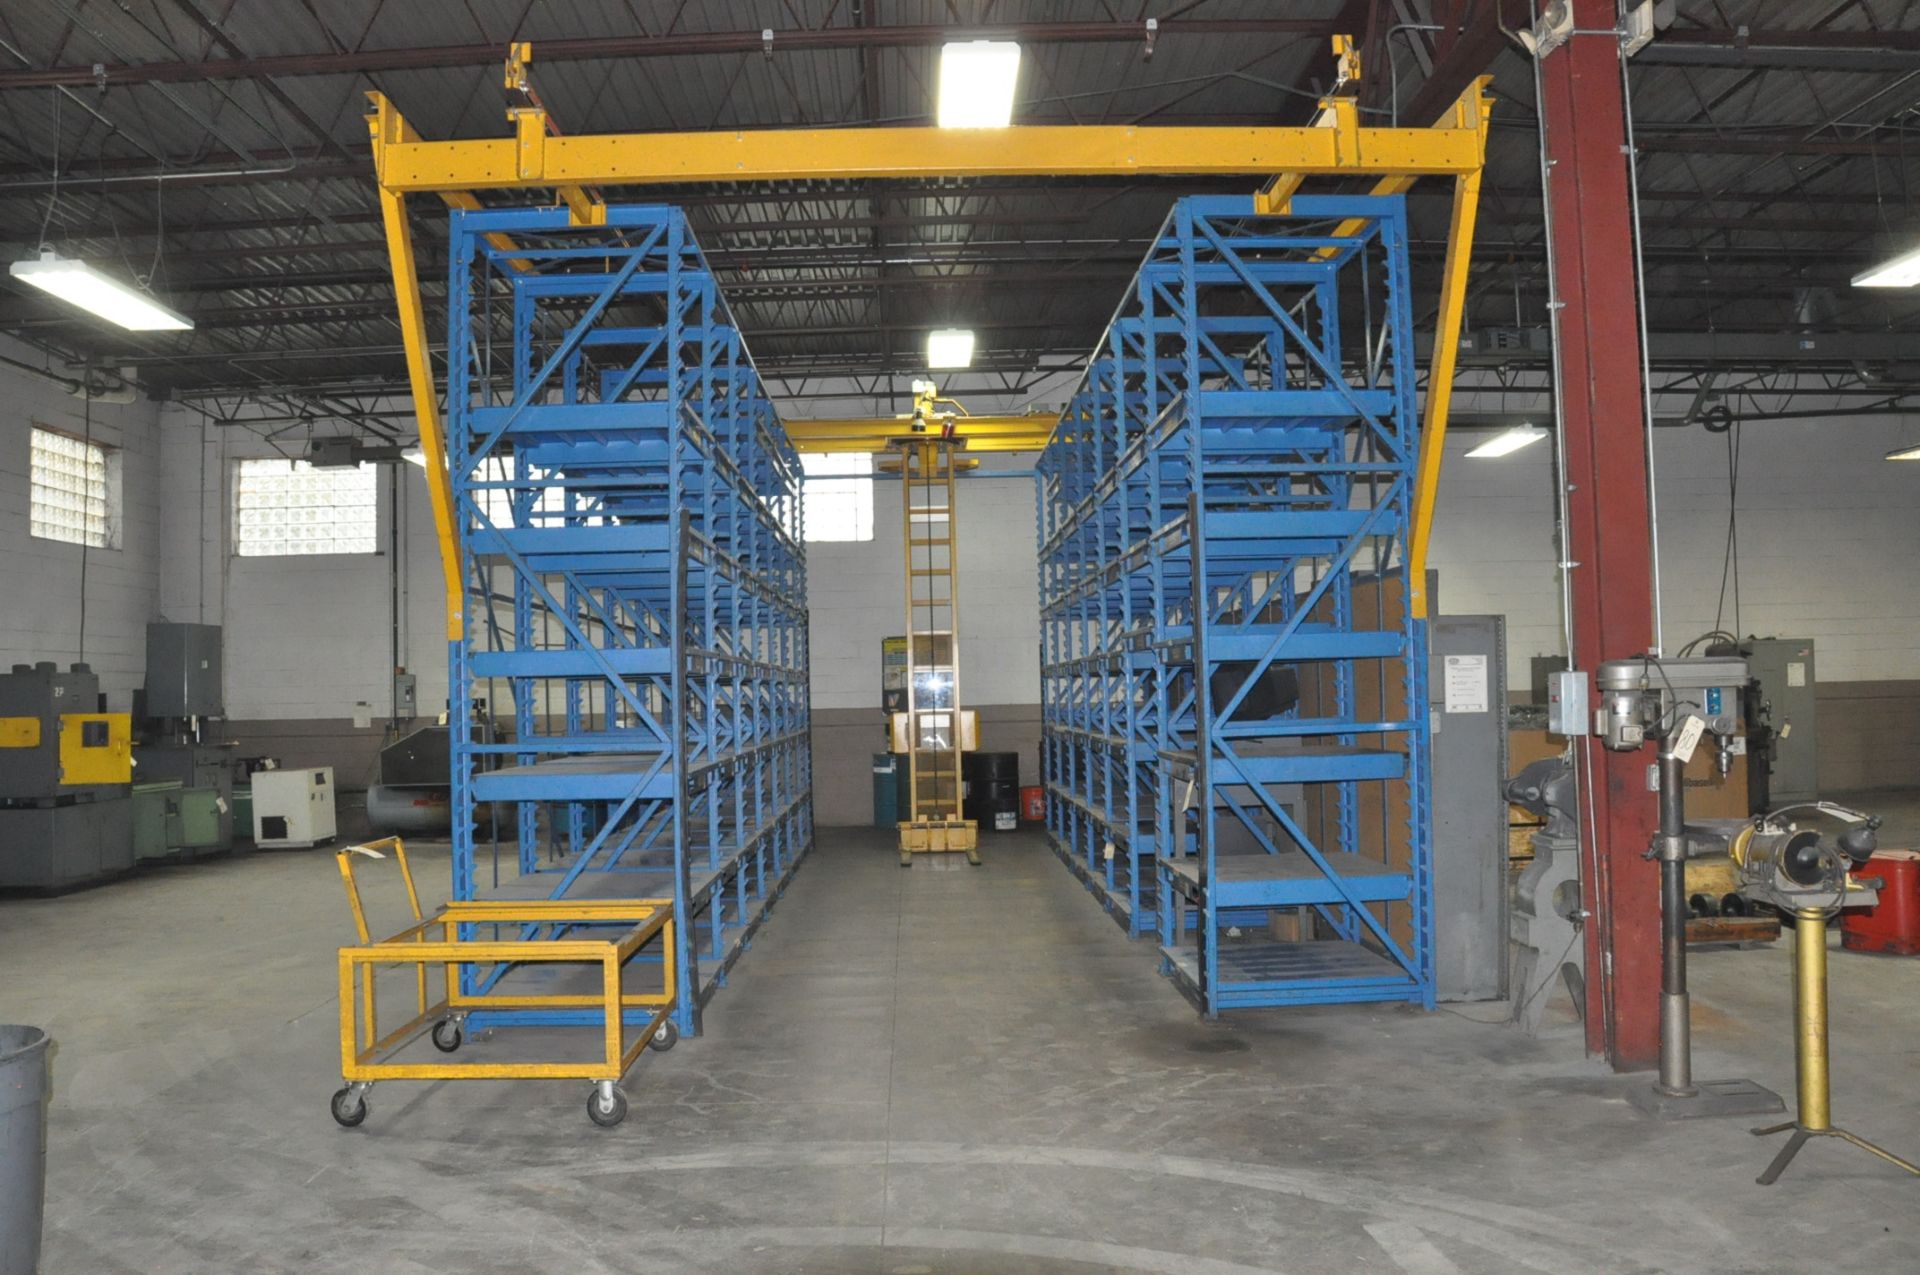 STANLEY STAK SYSTEM MODULAR RACK STACKING SYSTEM, 2,000-Lbs. Capacity Lift, (14) Sections Adjustable